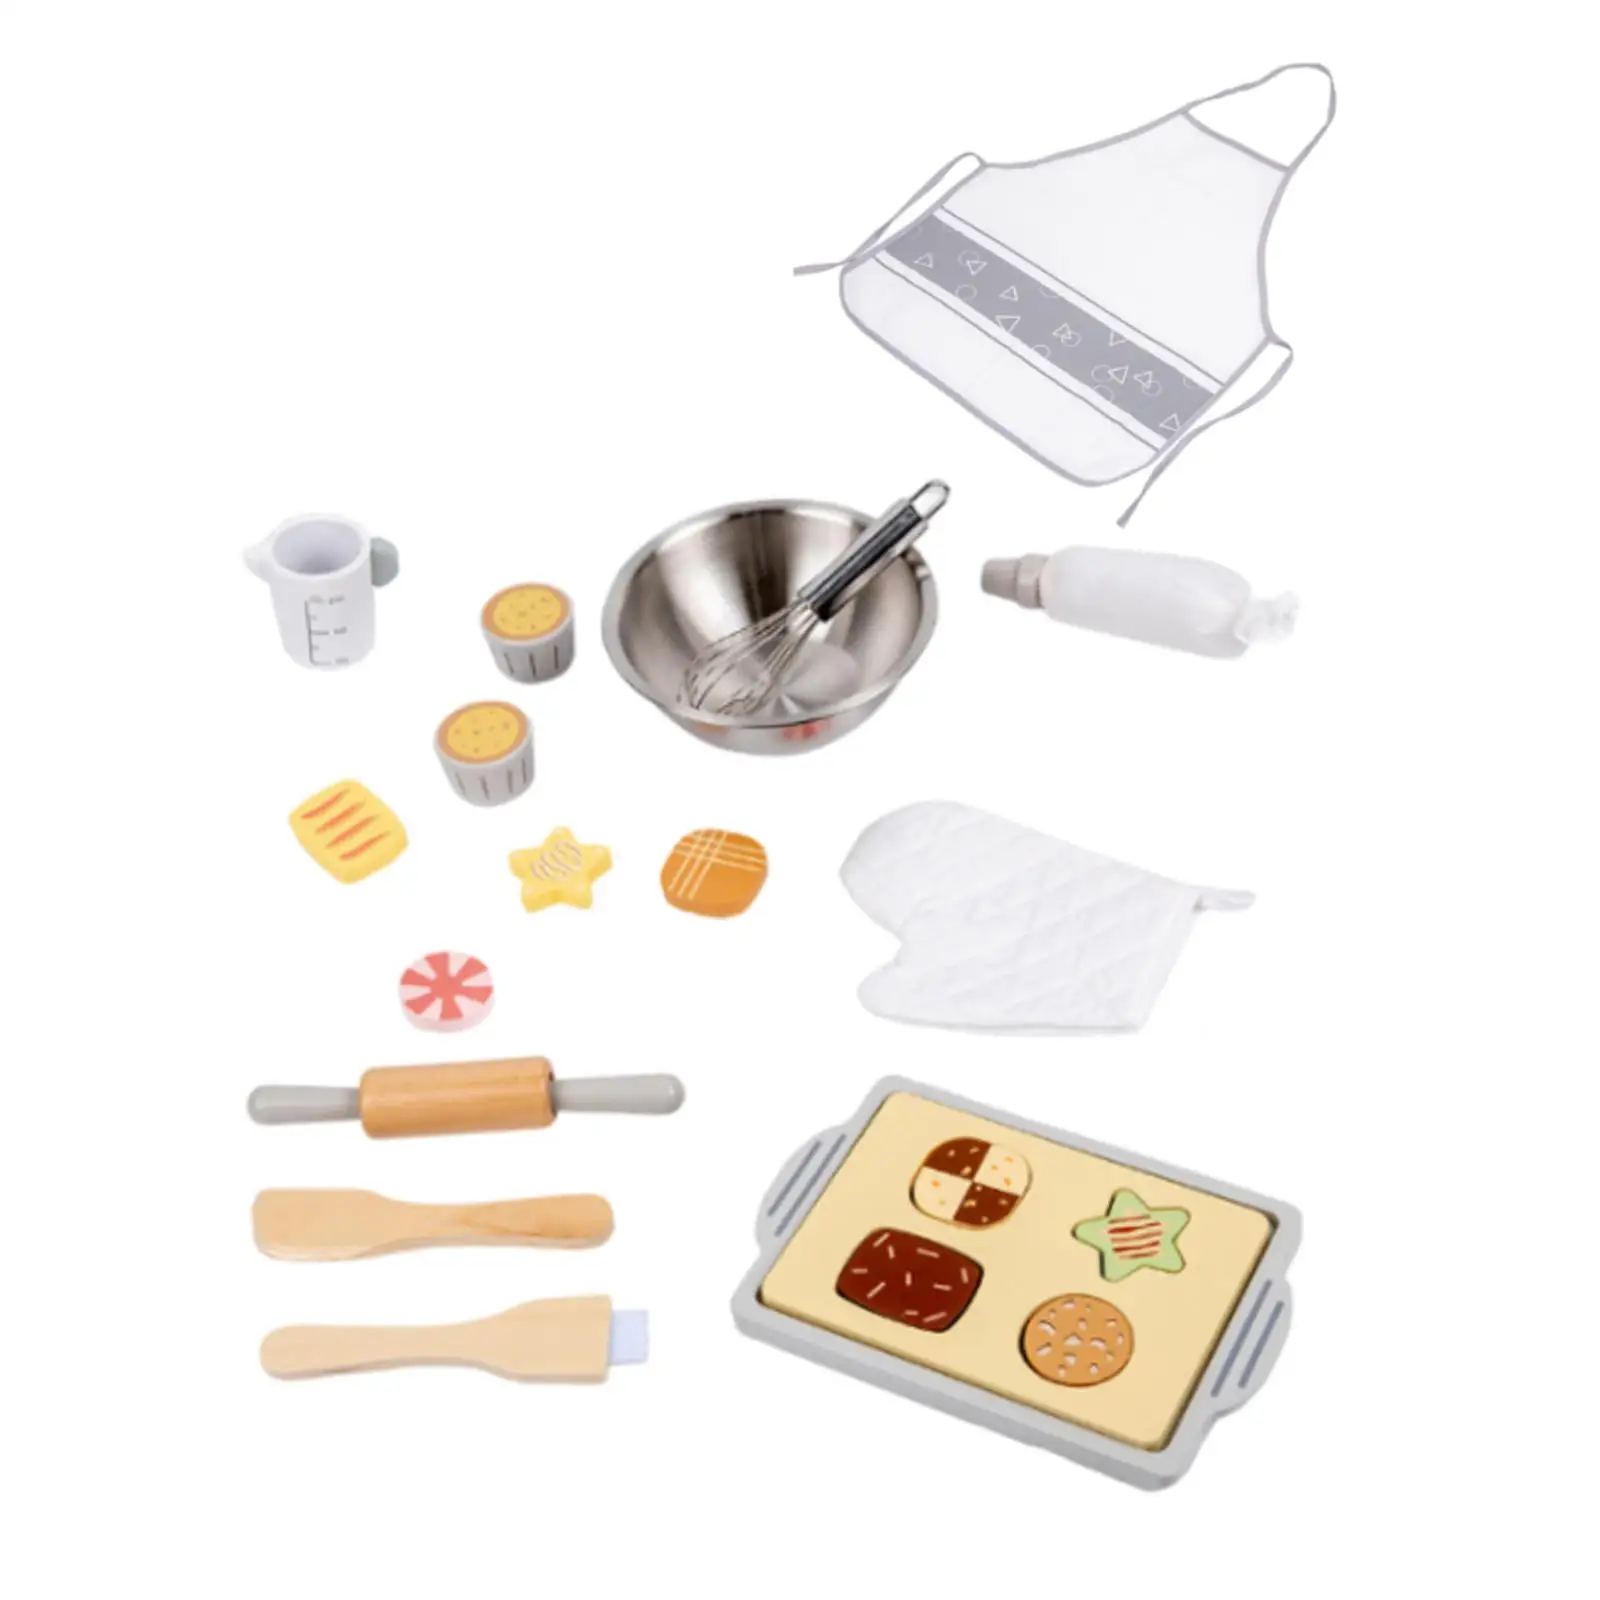 Kitchen Baking Pretend Toy Fine Motor Skill with Kids Apron Play Food Set Kids Cooking Set for Kids Preschool Toy Birthday Gift